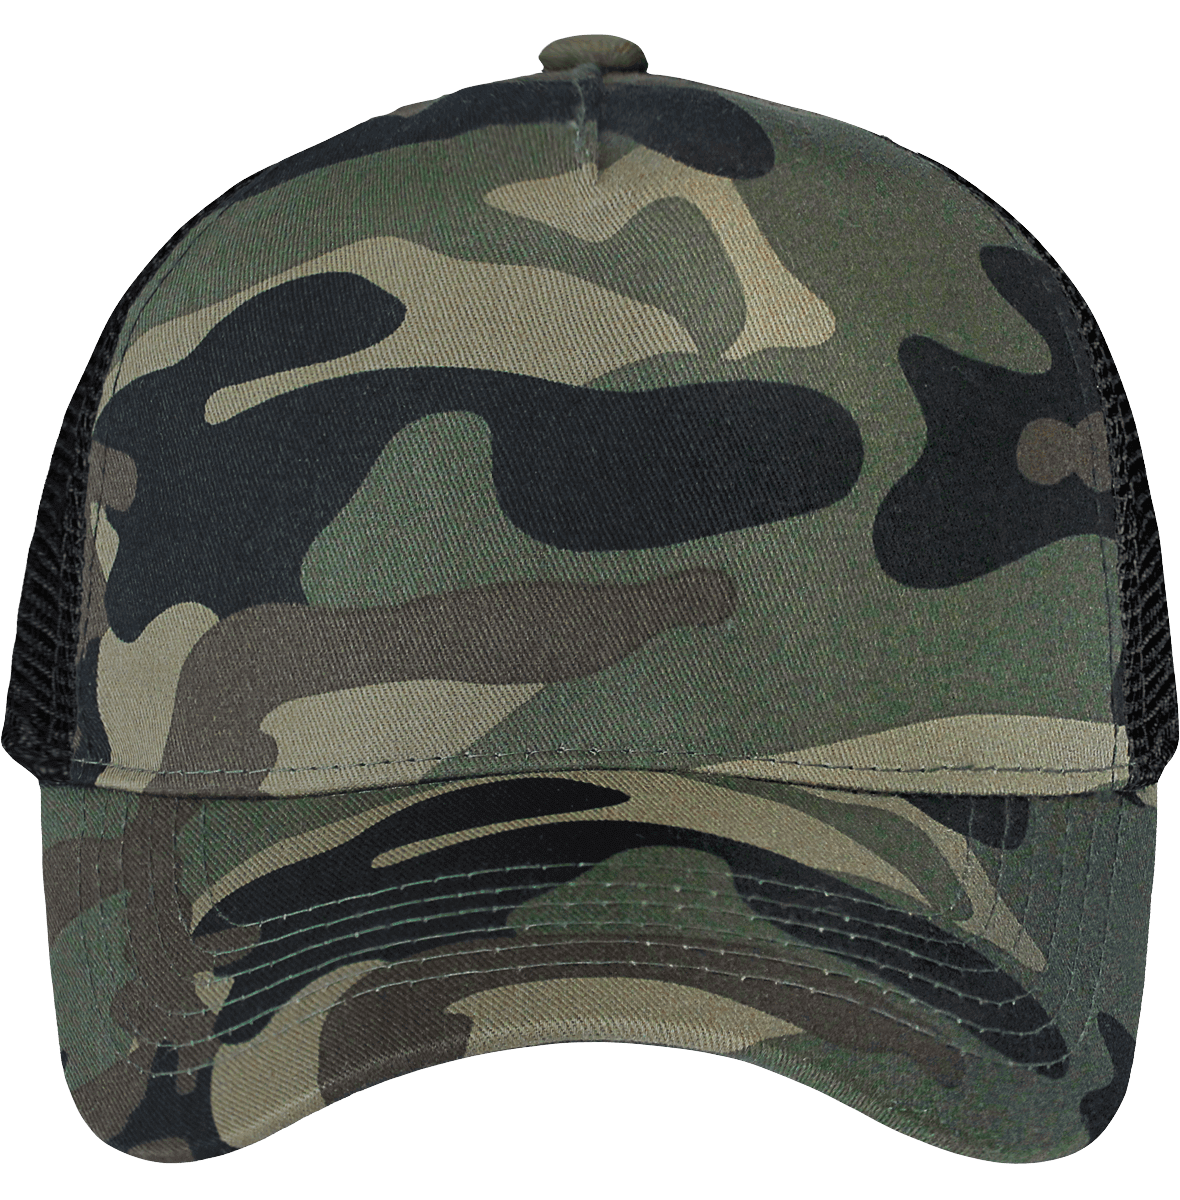 Trucker Snapback With Jungle Camouflage Patterns To Customize On Tunetoo: Jungle Camo